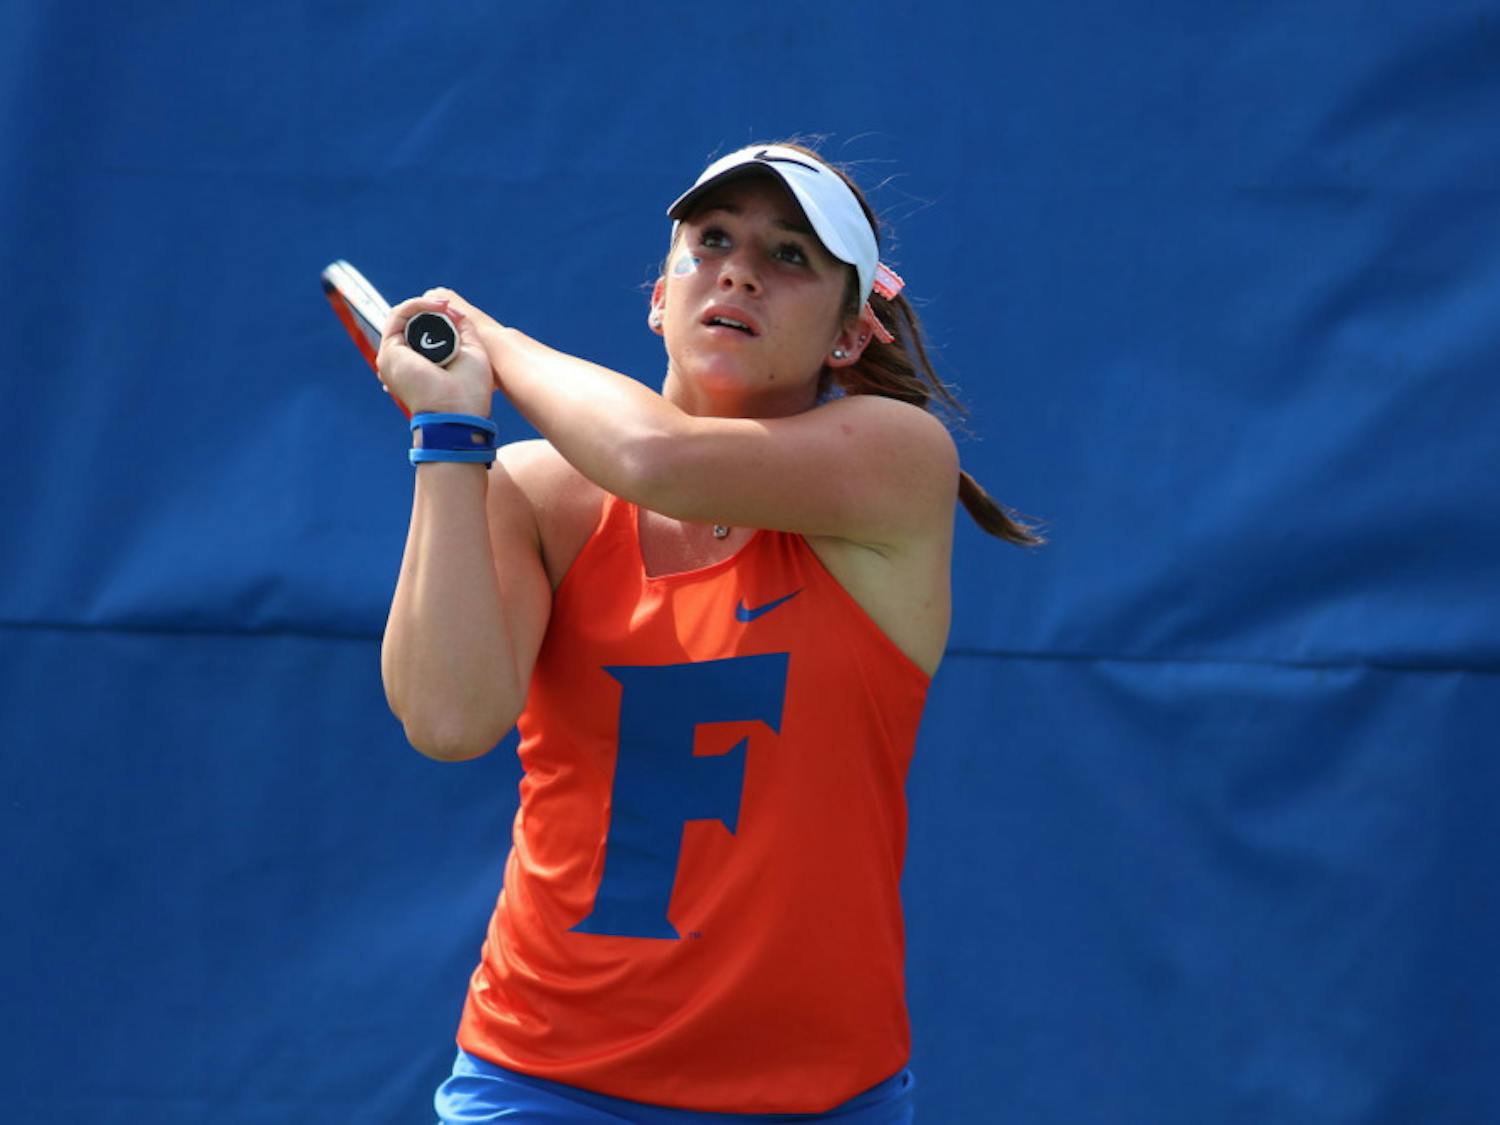 Sophomore Victoria Emma won her singles match, but she and McCartney Kessler lost their third consecutive doubles match as a pair. The&nbsp;Gators women’s tennis team fell 4-3 to the No. 30 Knights on Sunday night.